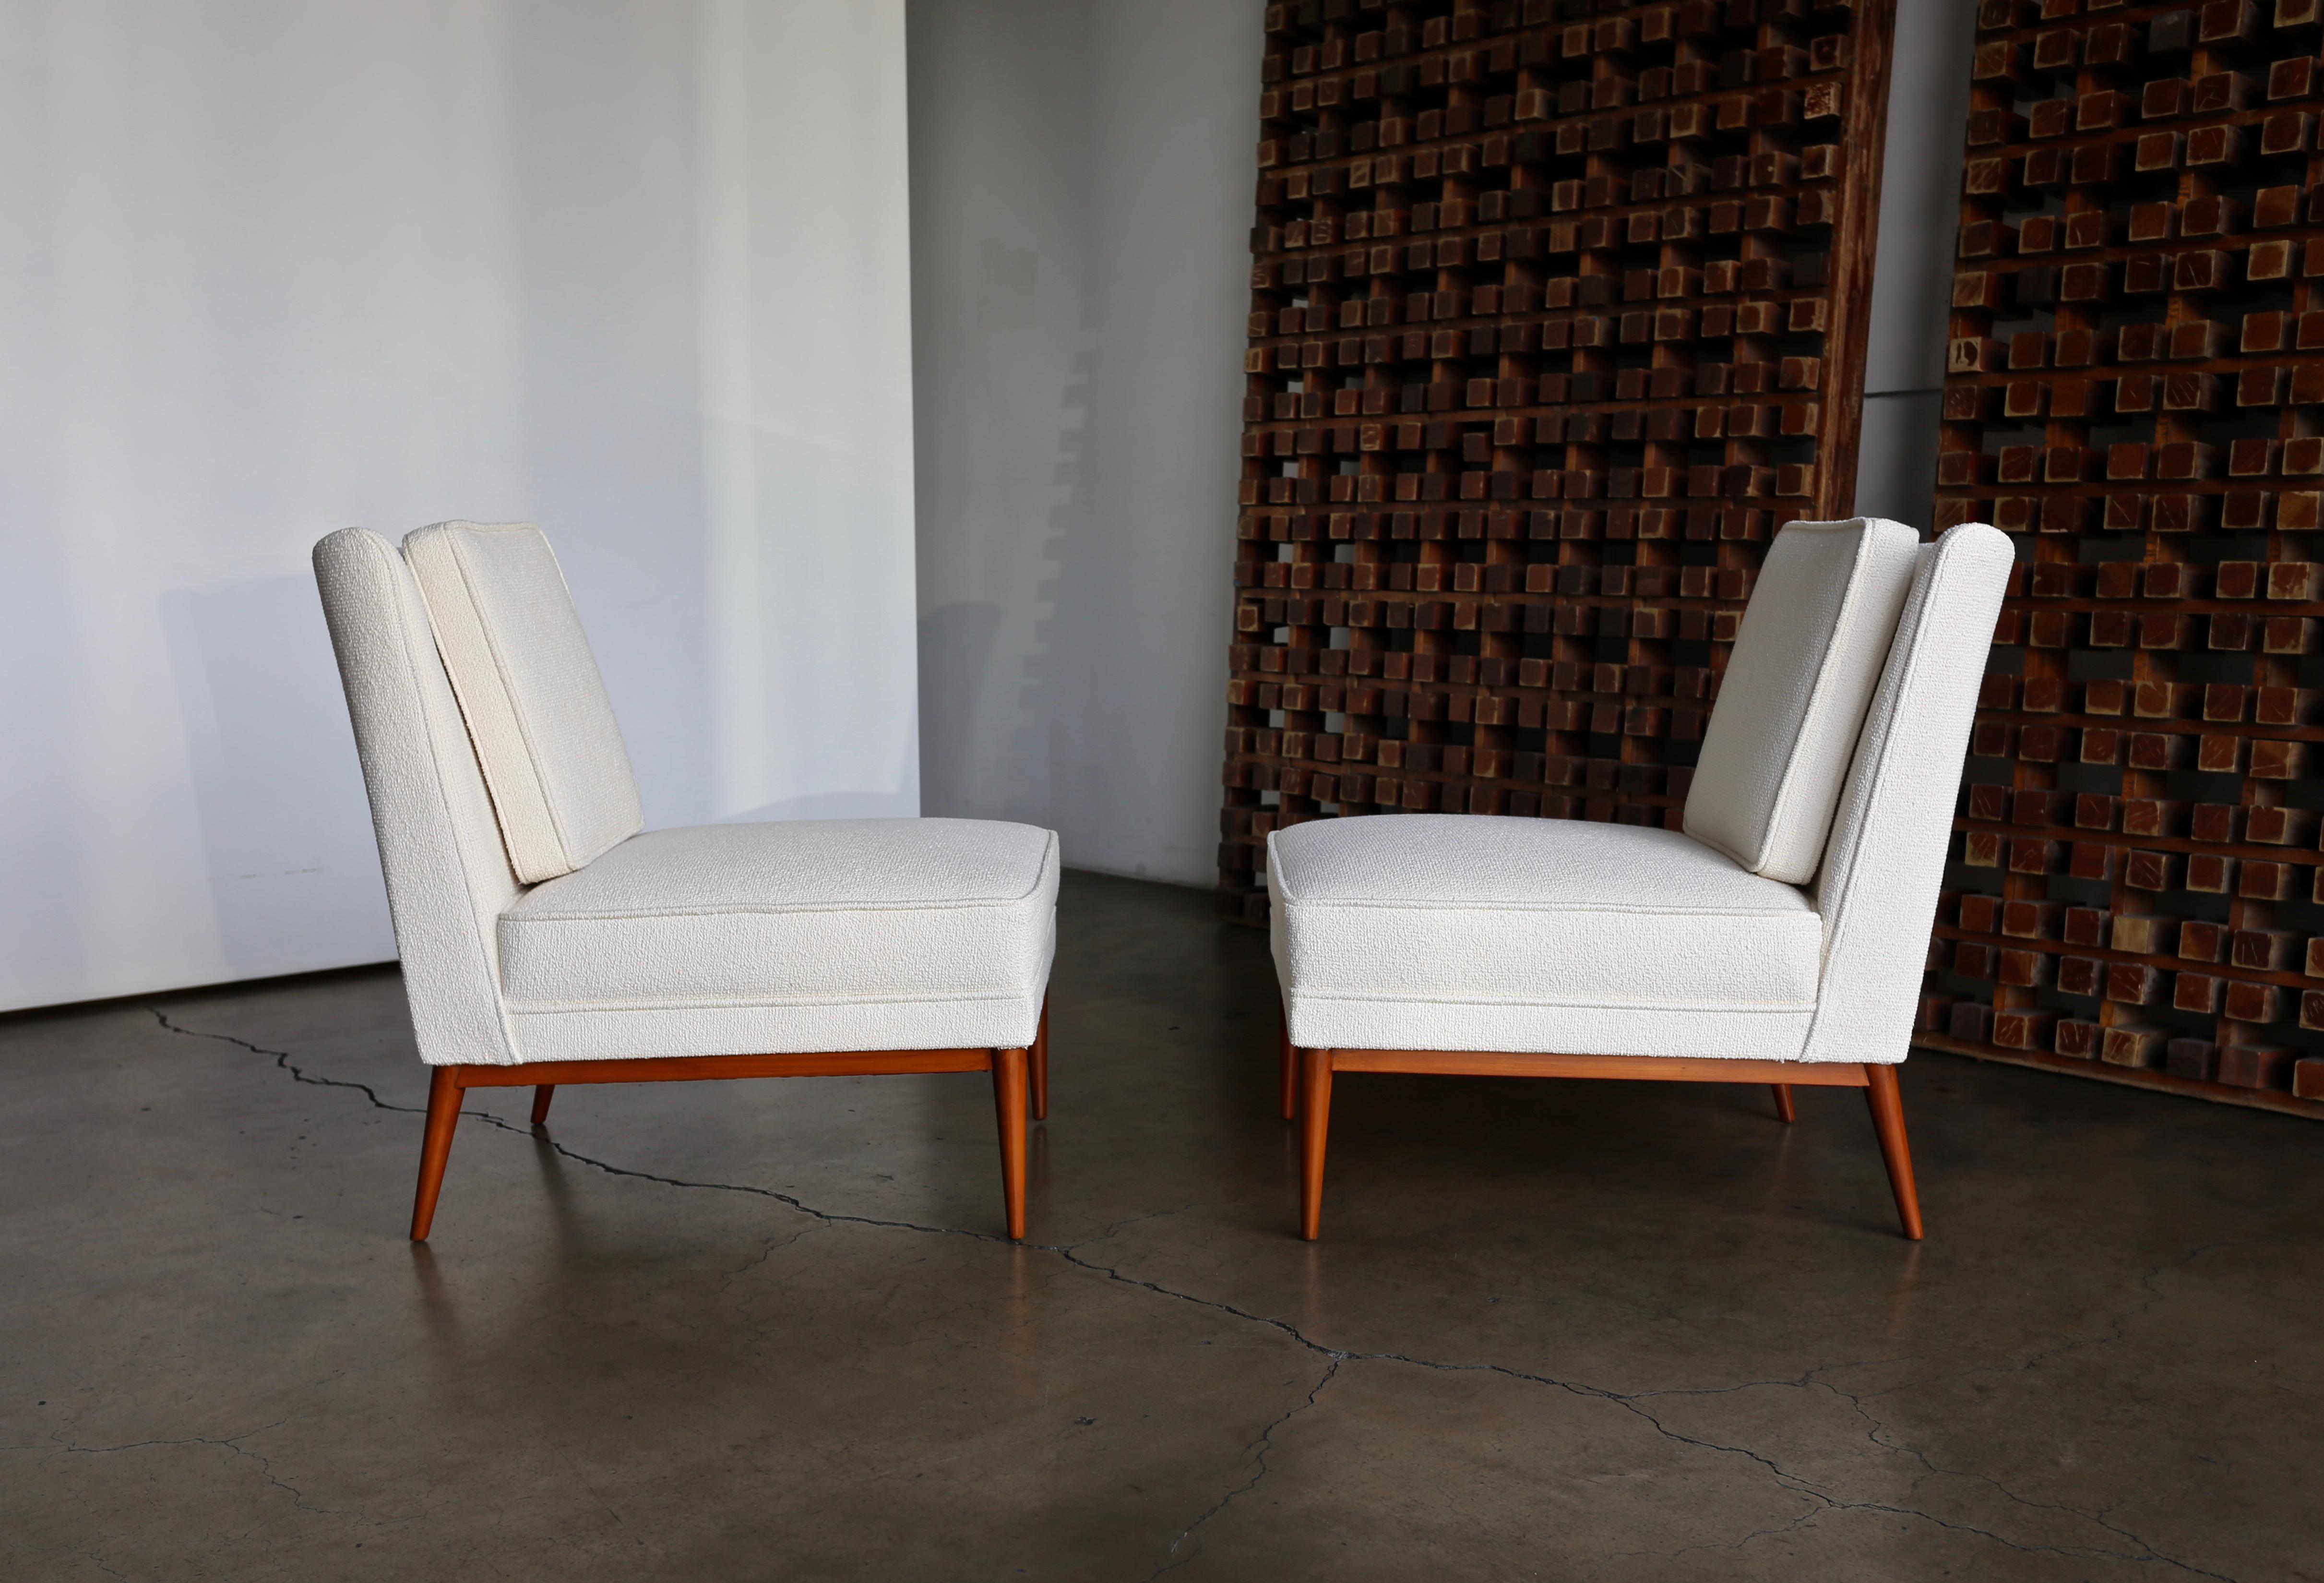 Pair of Paul McCobb slipper lounge chairs Model 300 for Custom Craft Inc. circa 1952. This pair has been professionally restored.

 